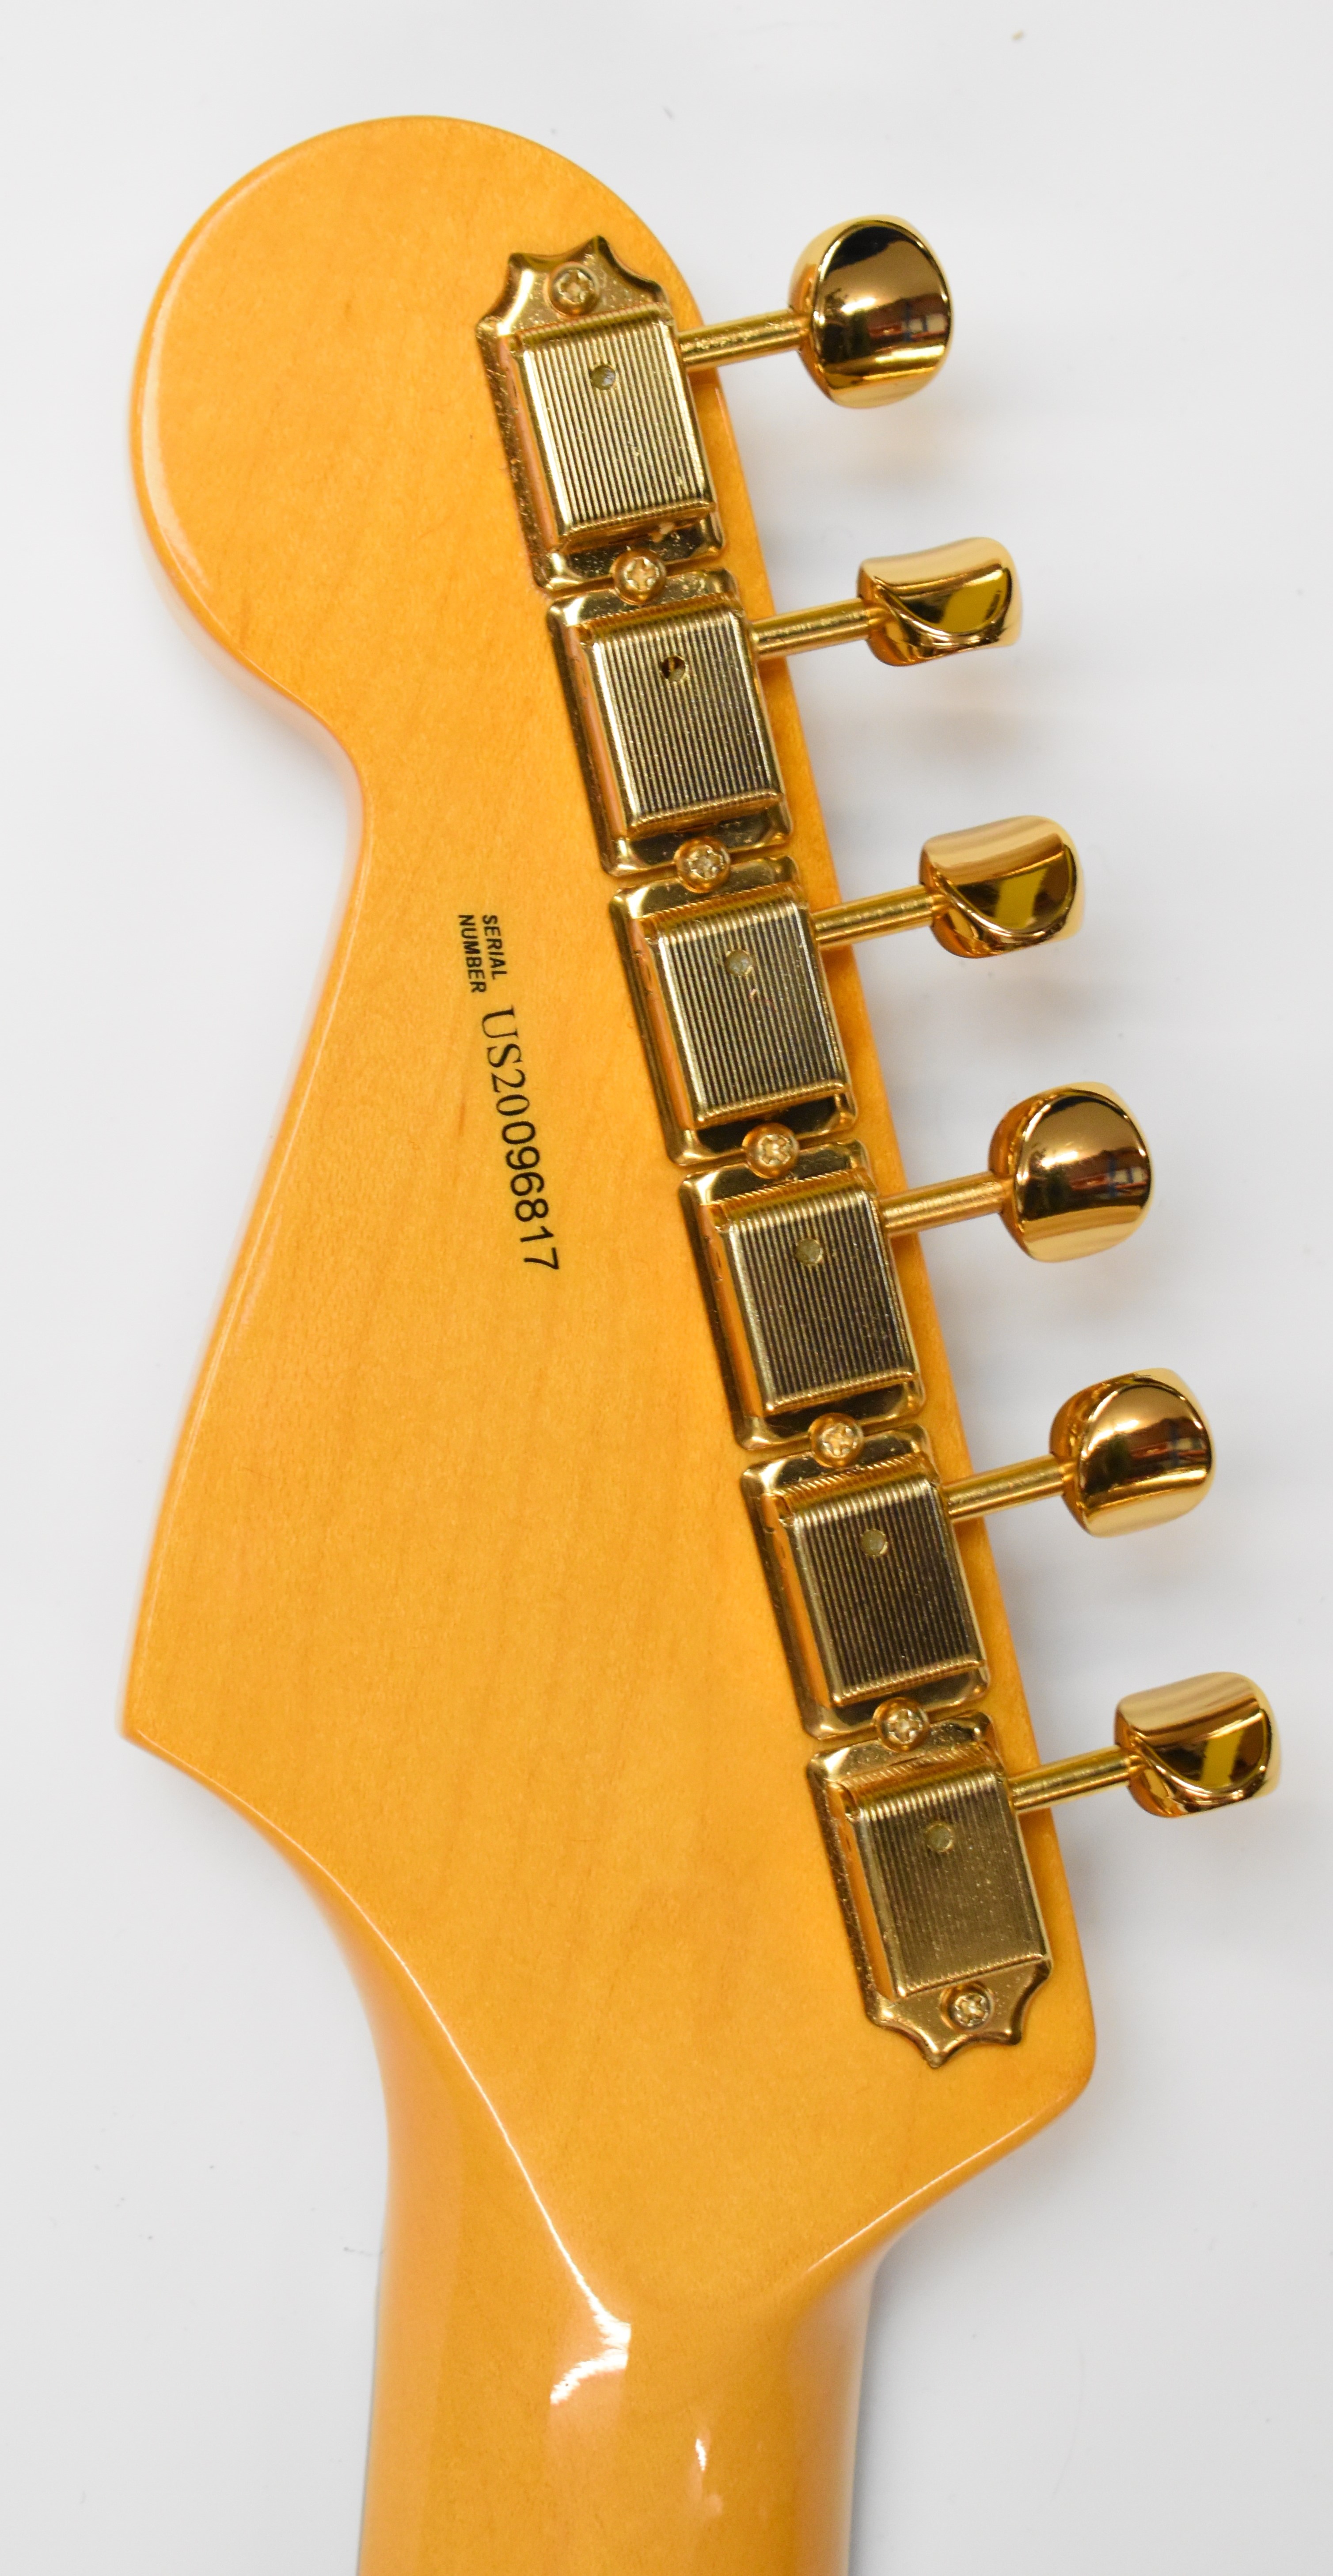 Fender Stevie Ray Vaughan SRV Signature Series Stratocaster electric guitar in 3 tone sunburst - Image 7 of 8